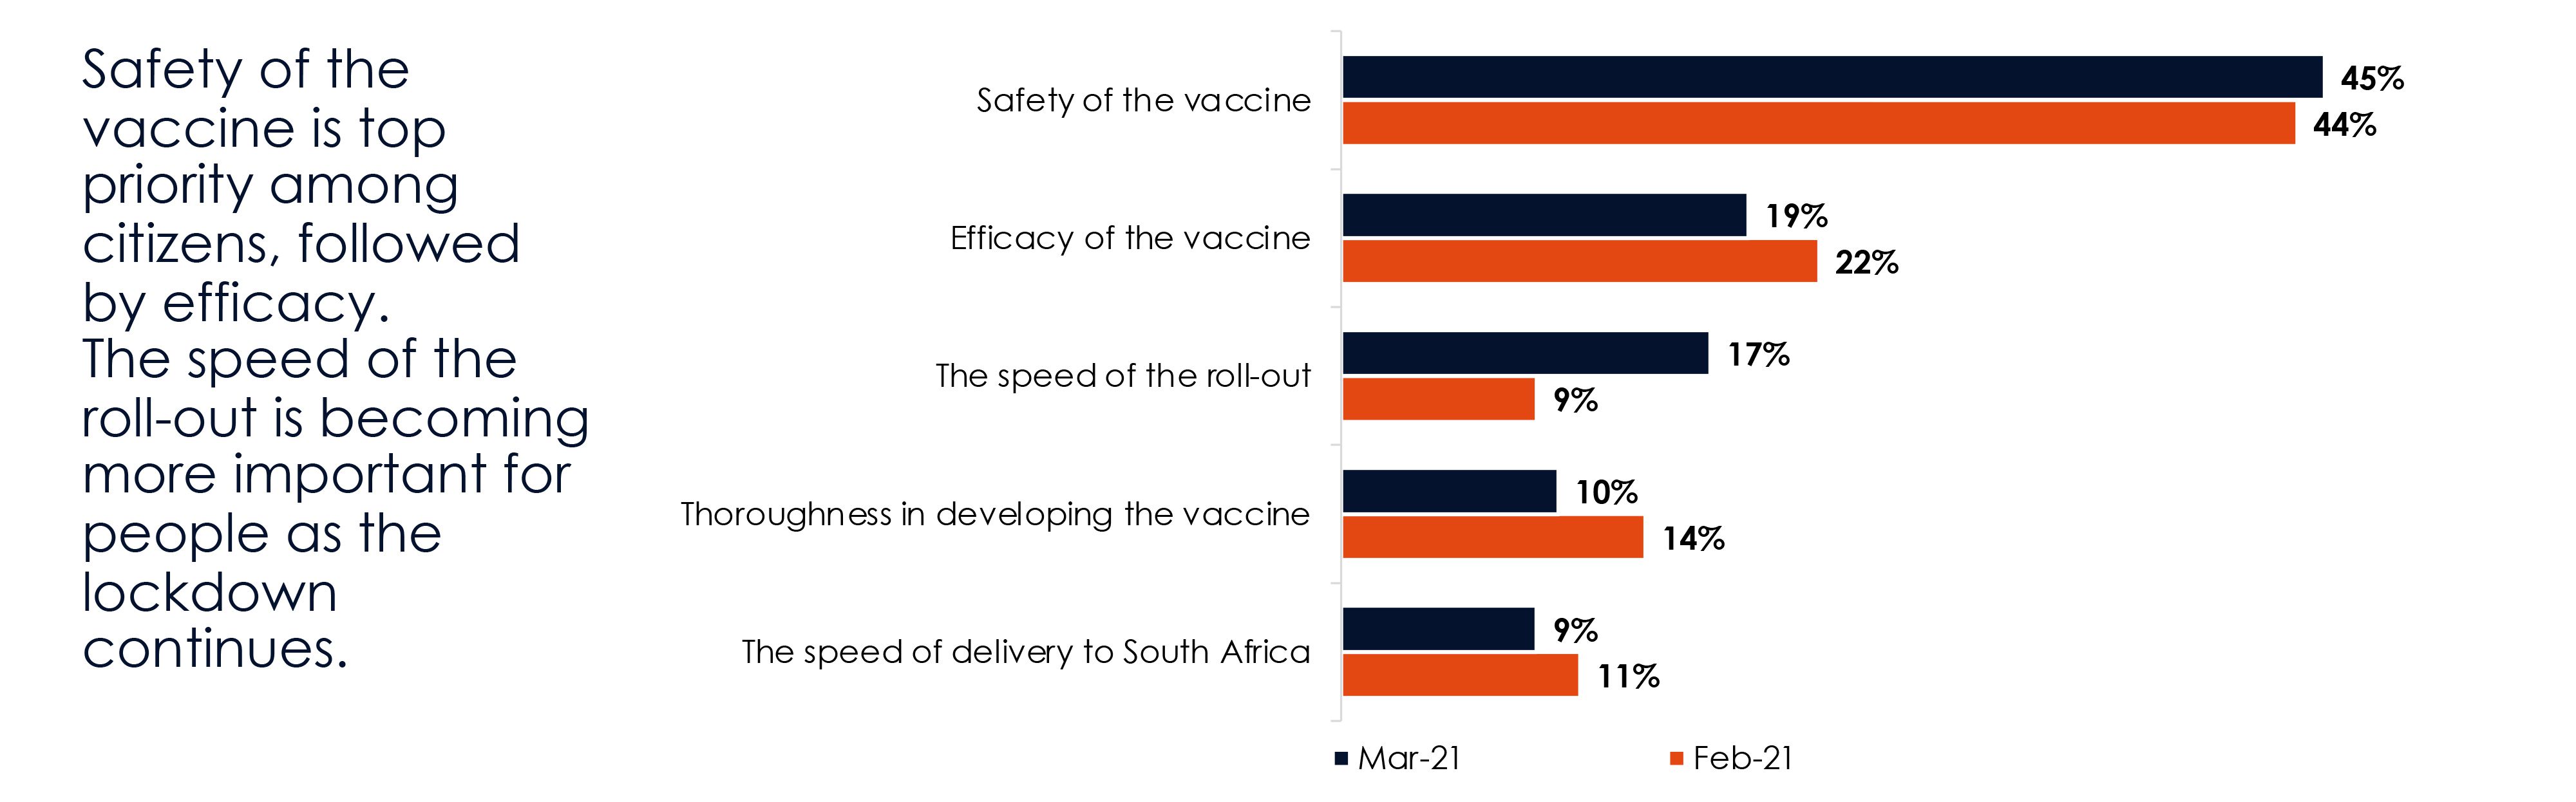 Like their global compatriots, many South Africans remain fearful of Covid vaccines